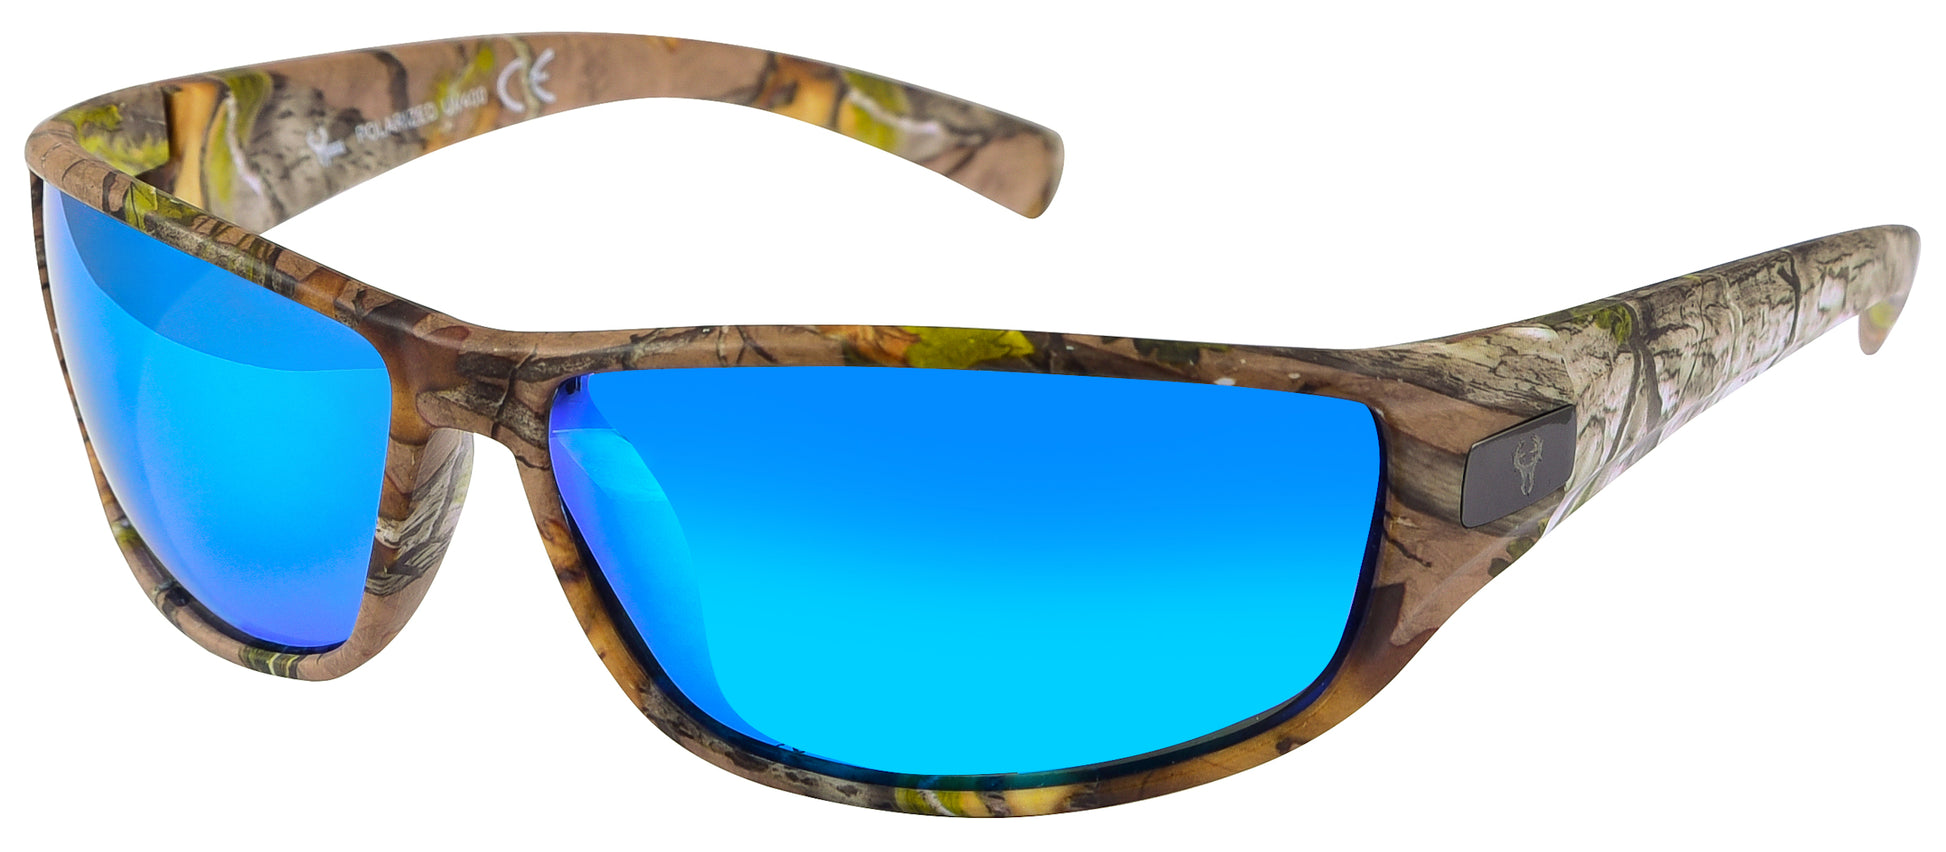 Main image: Hornz Brown Forest Camouflage Polarized Sunglasses for Men - WhiteTail - Free Matching Microfiber Pouch - Brown Camo Frame - Ice Blue Lens